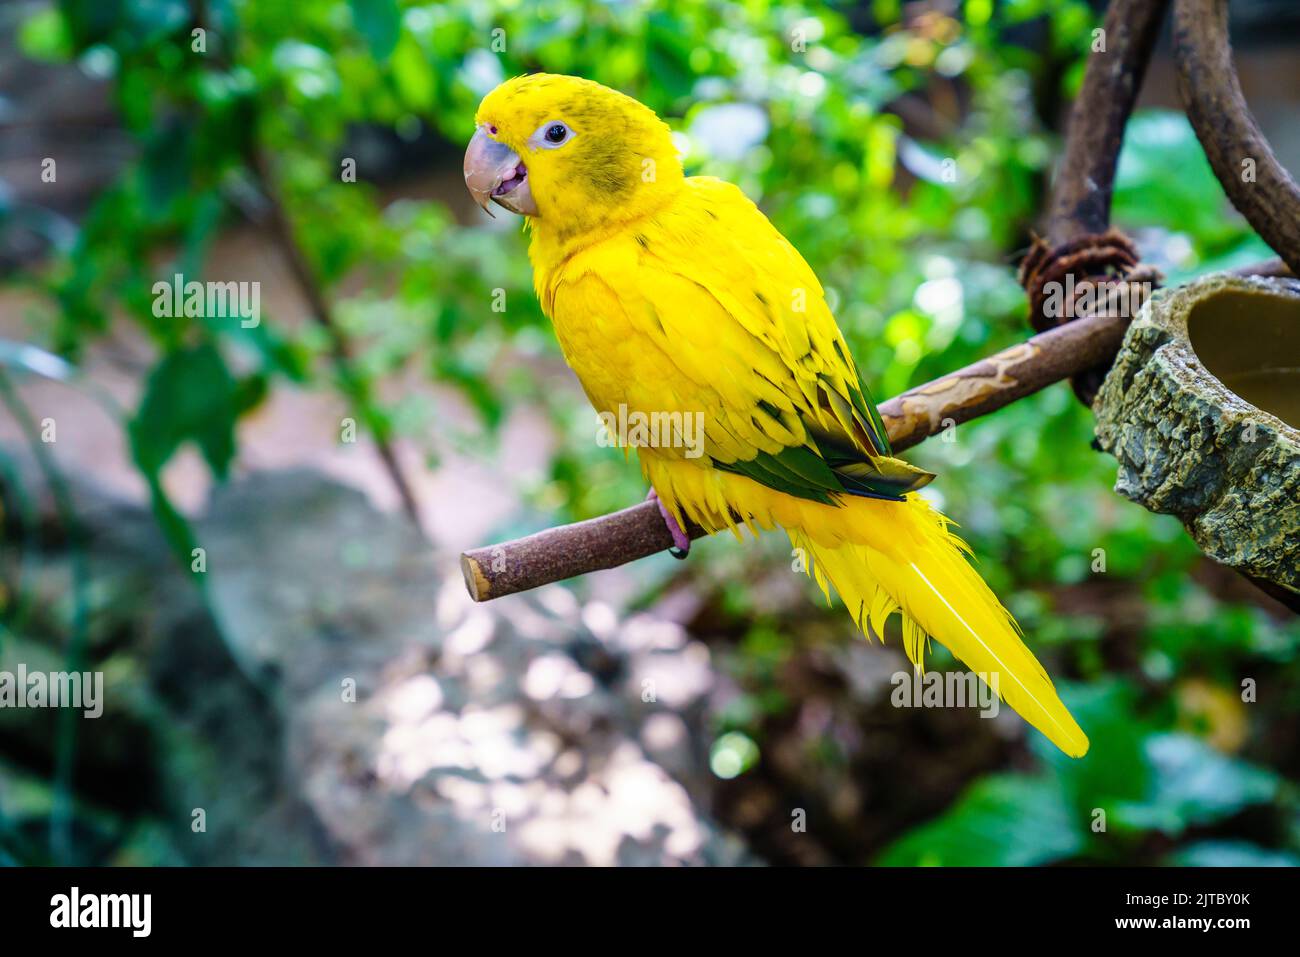 Portrait of yellow parrot in a bird sanctuary Stock Photo